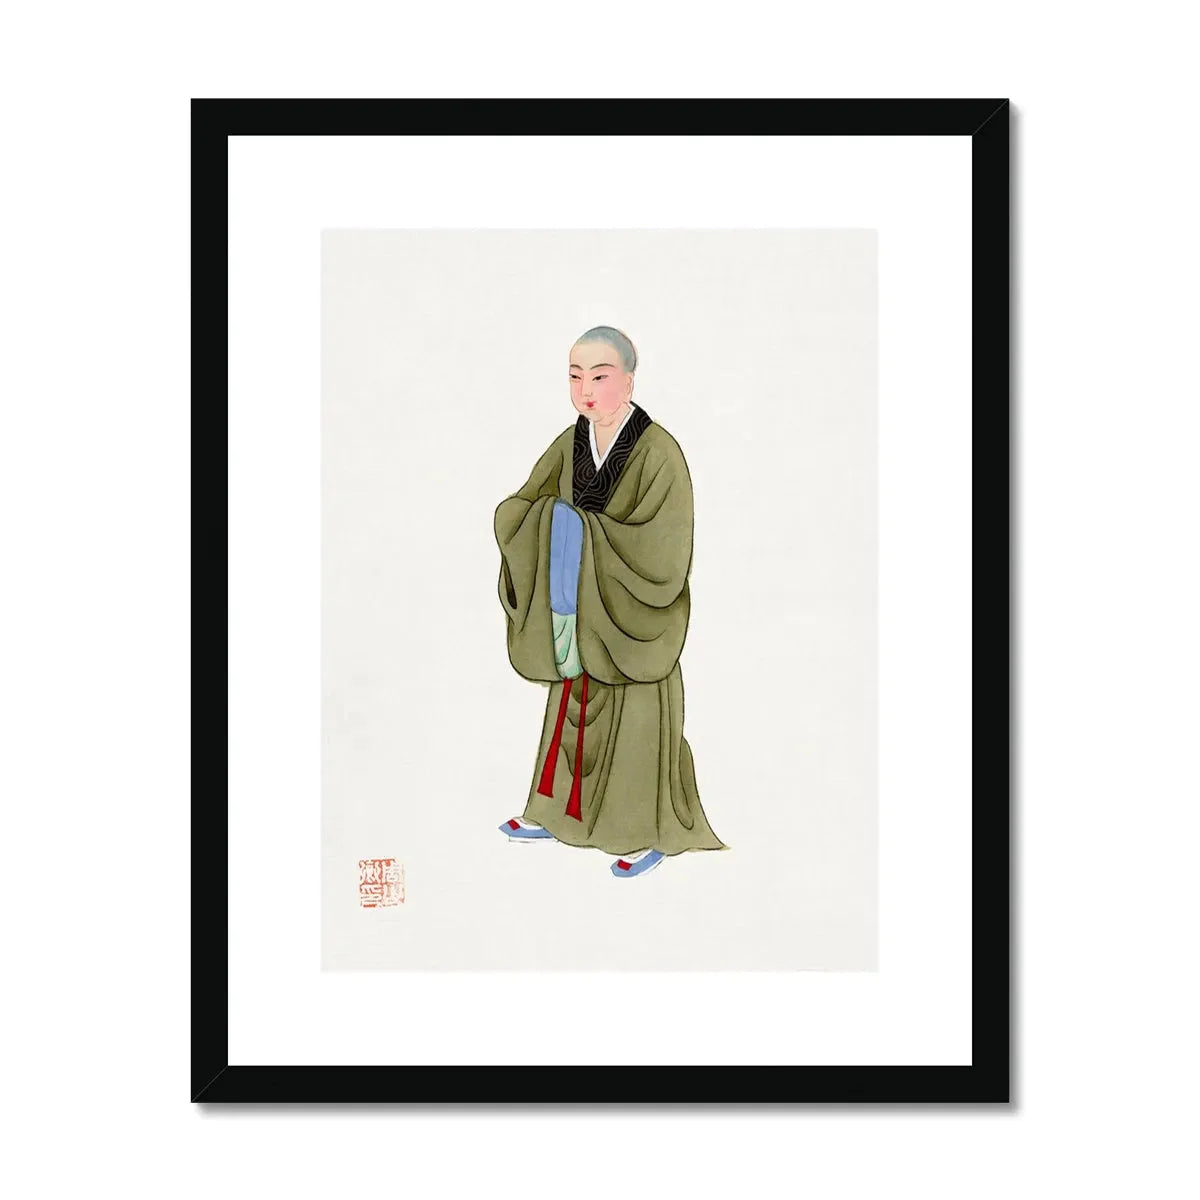 Chinese Buddhist Monk Framed & Mounted Print - 16’x20’ / Black Frame - Posters Prints & Visual Artwork - Aesthetic Art